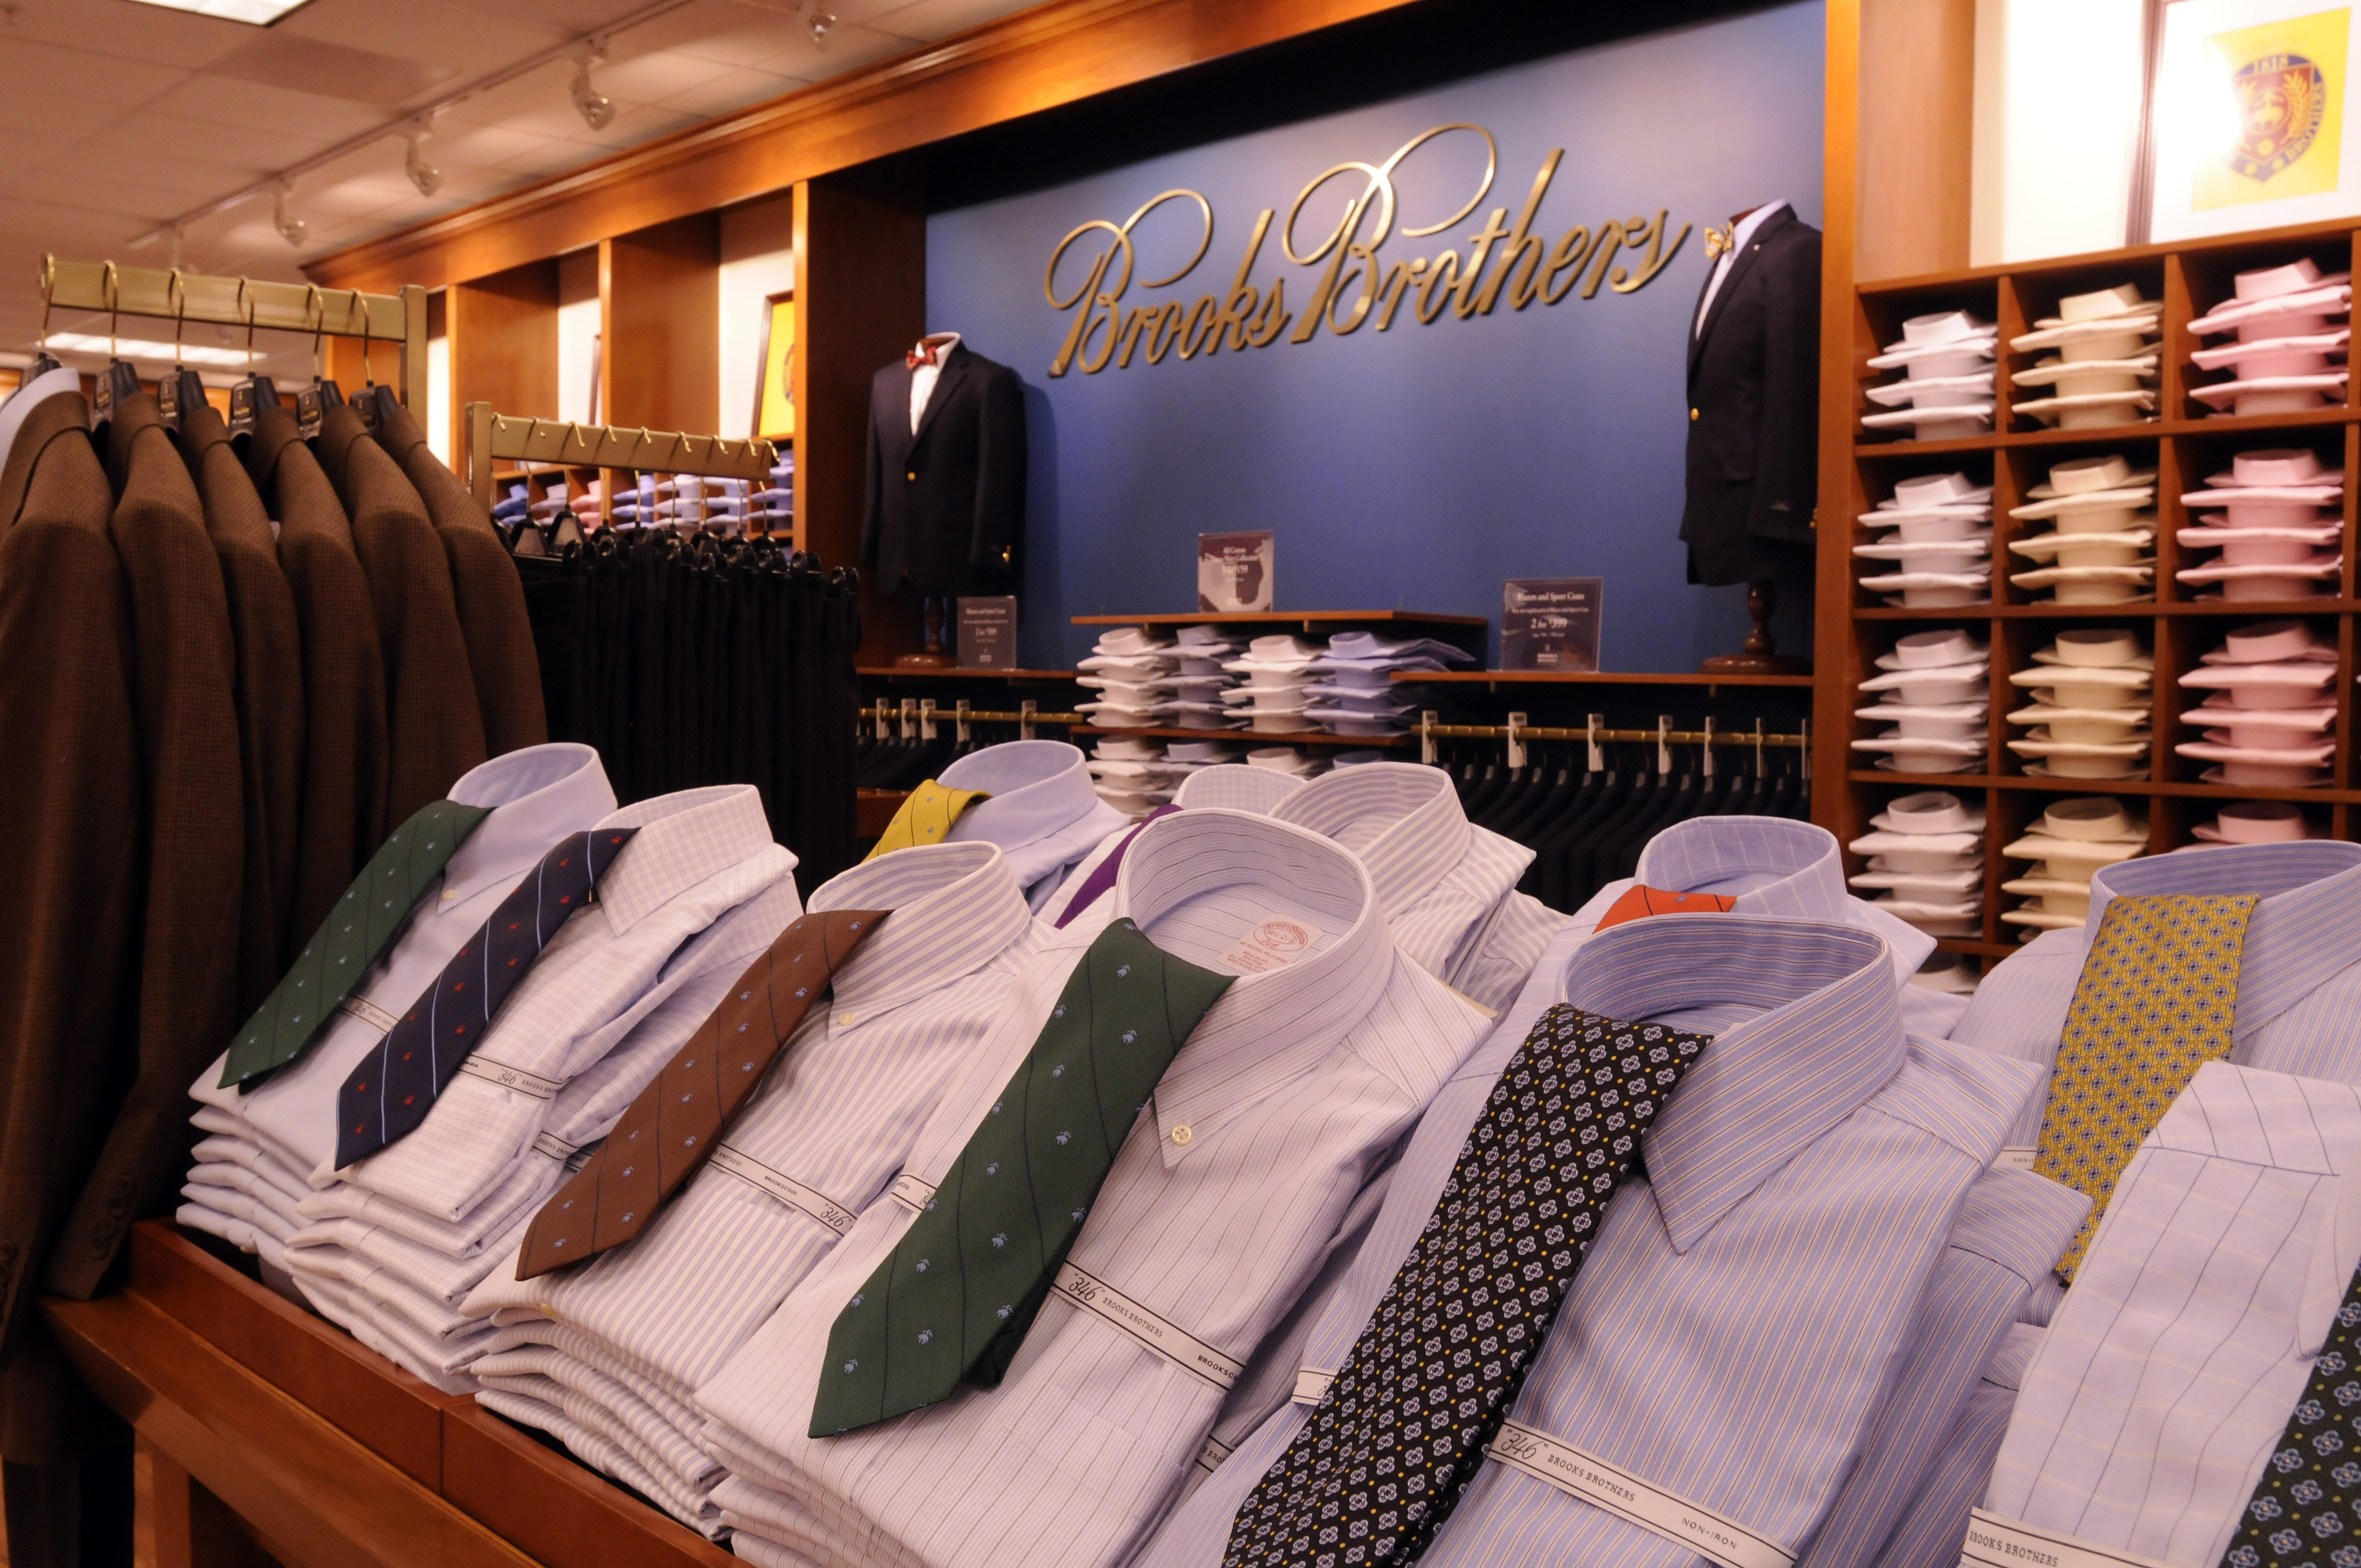 Brooks Brothers online sale offers up 